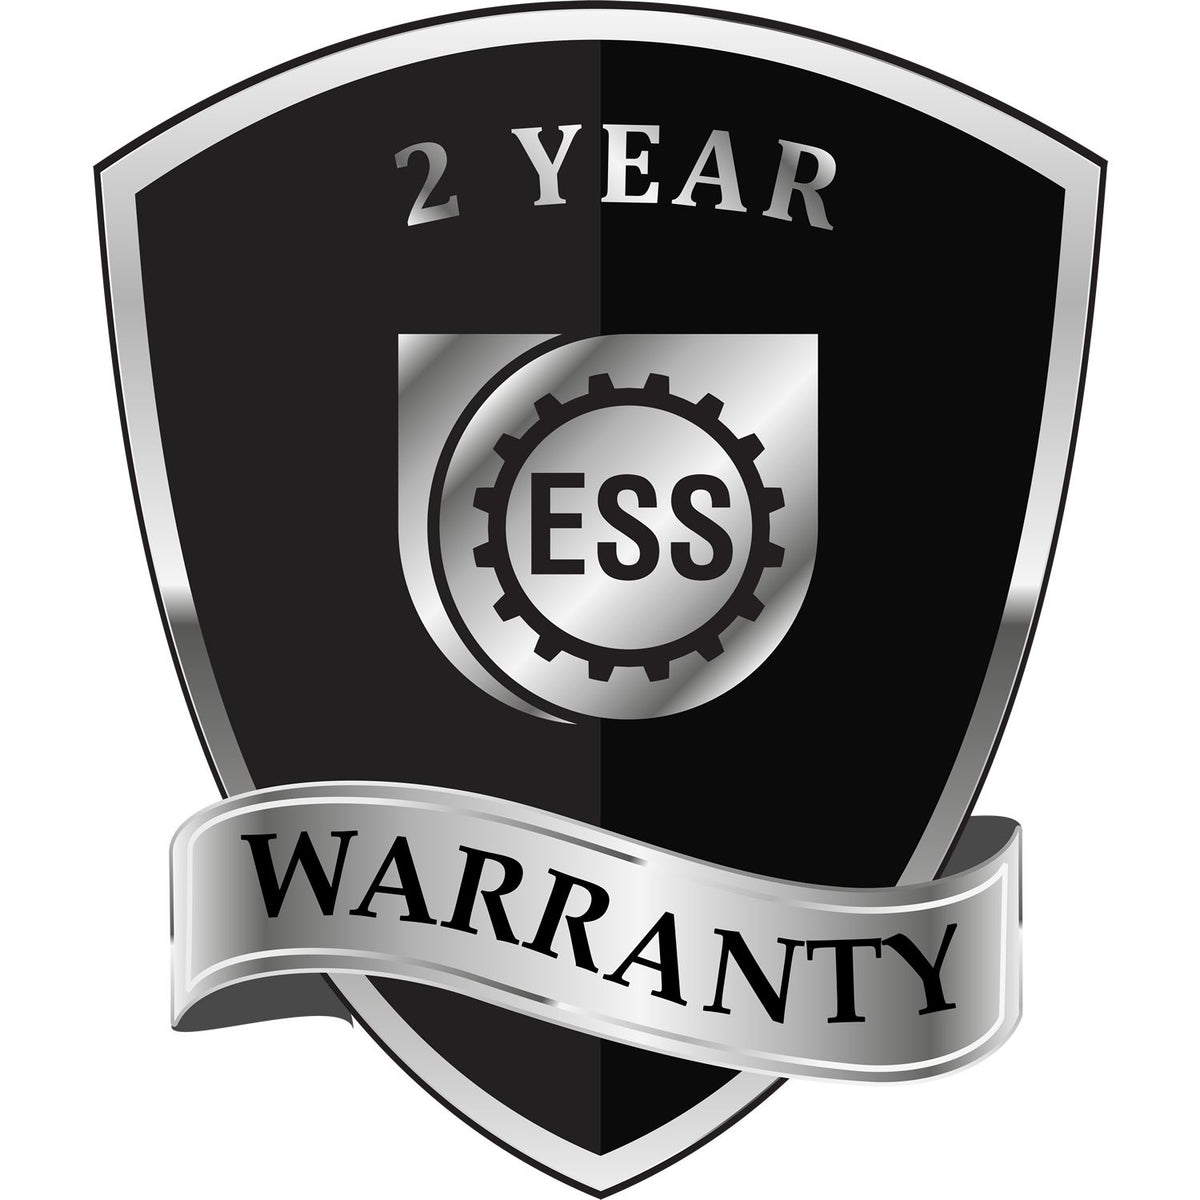 A black and silver badge or emblem showing warranty information for the Handheld Louisiana Professional Geologist Embosser